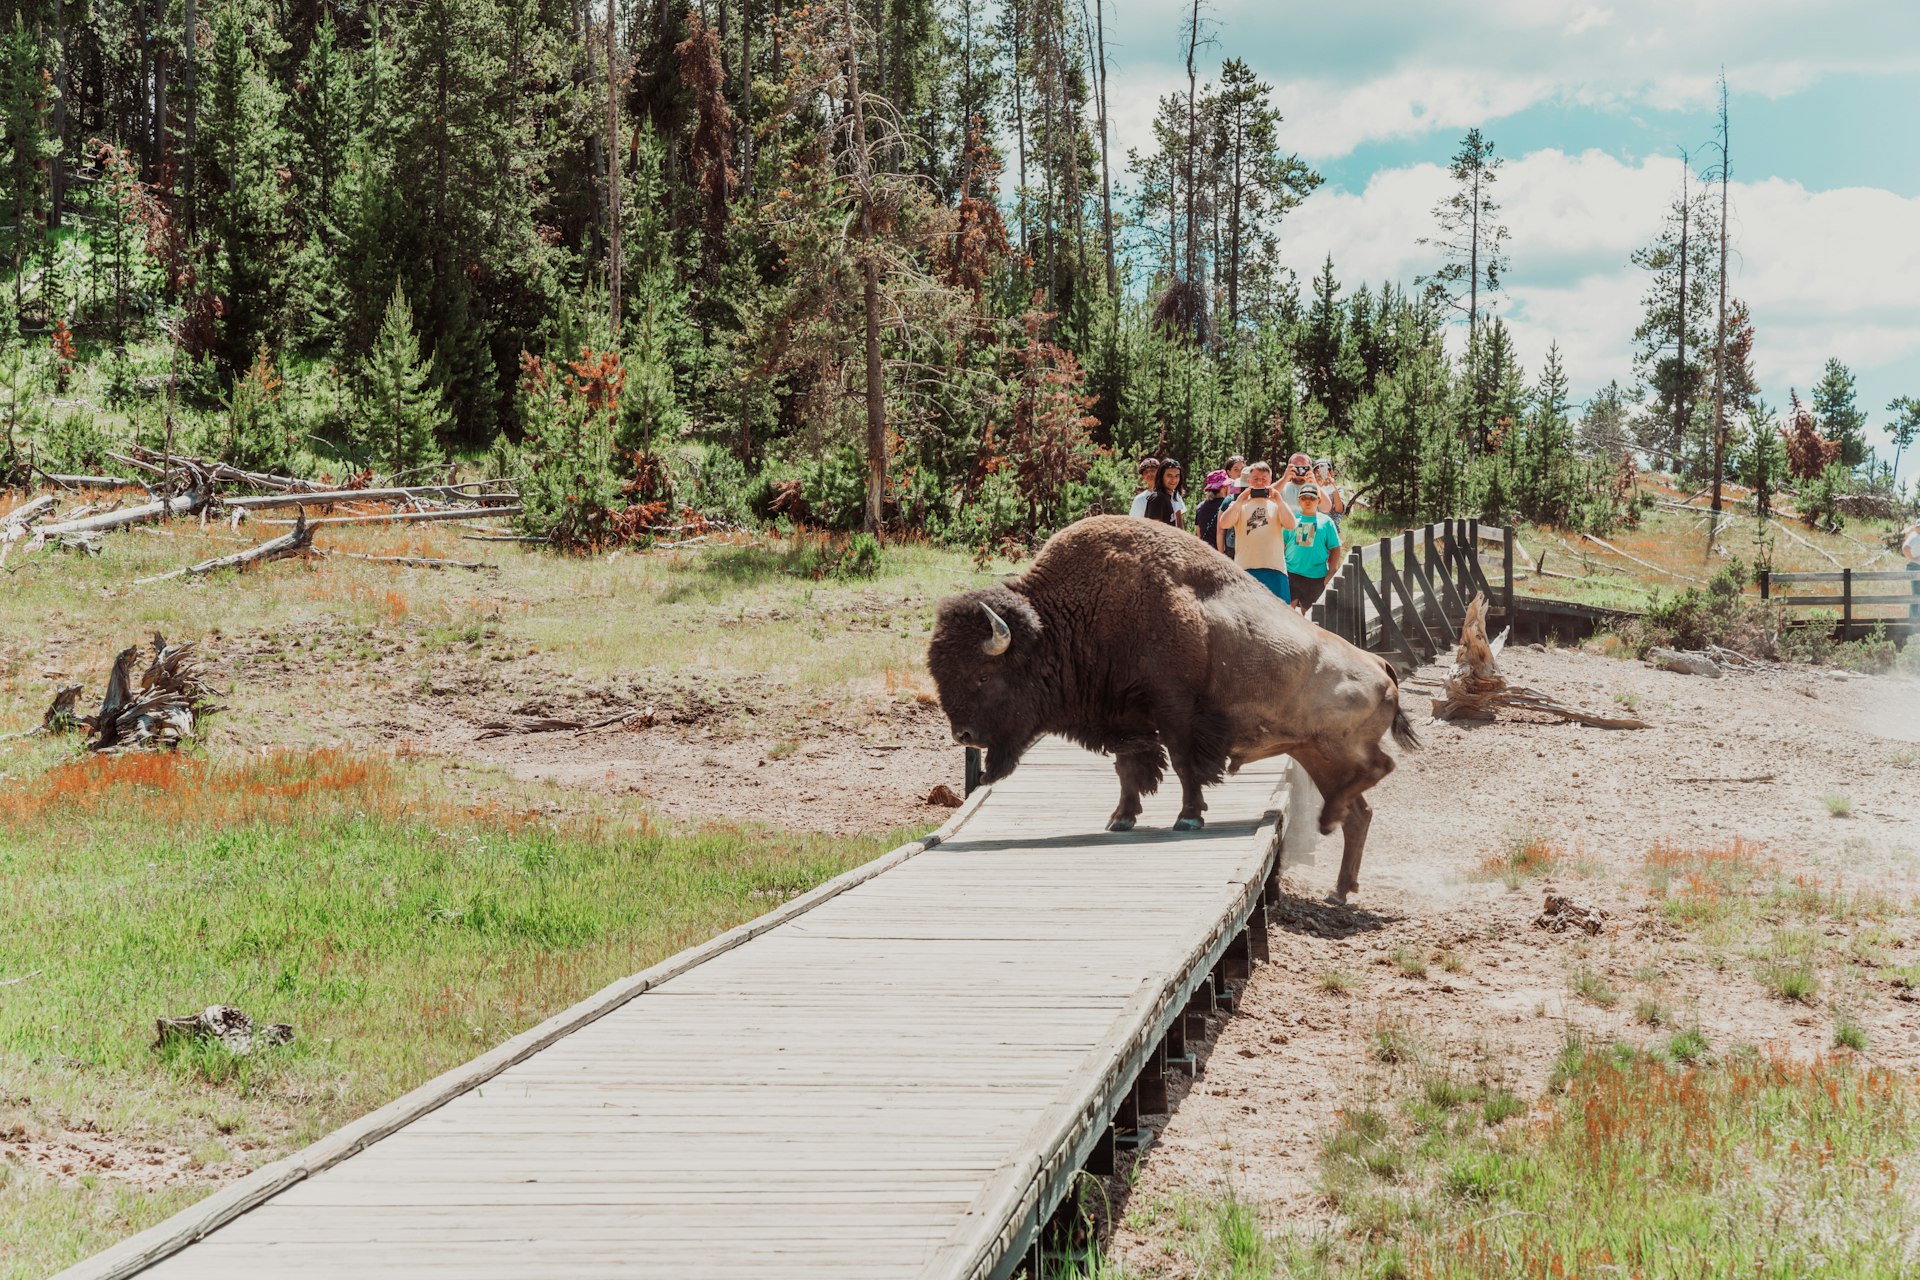 A bison walks across a boardwalk path in a volcanic area of a national park